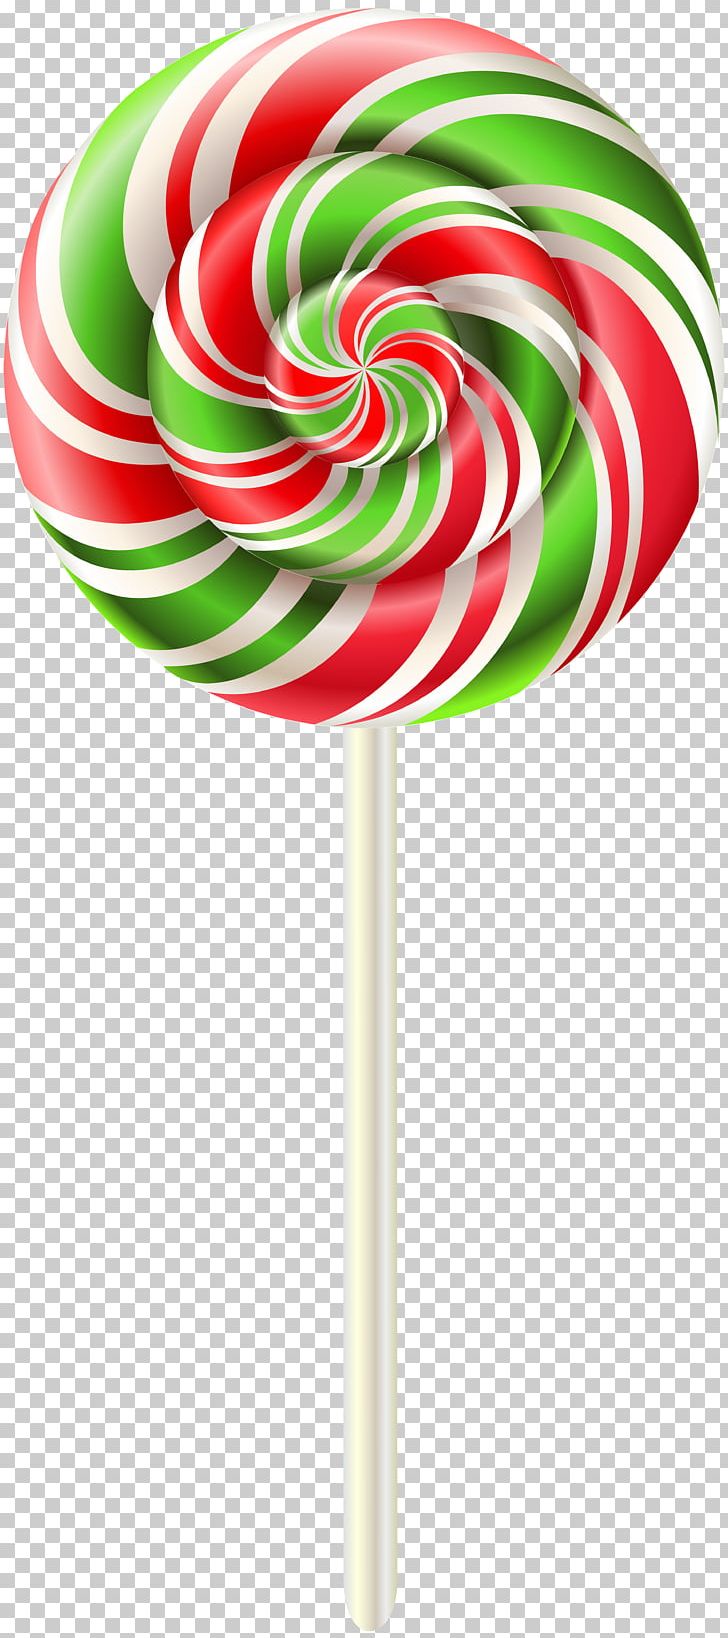 Lollipop PNG, Clipart, Android Lollipop, Candy, Chupa Chups, Clipart, Clip Art Free PNG Download